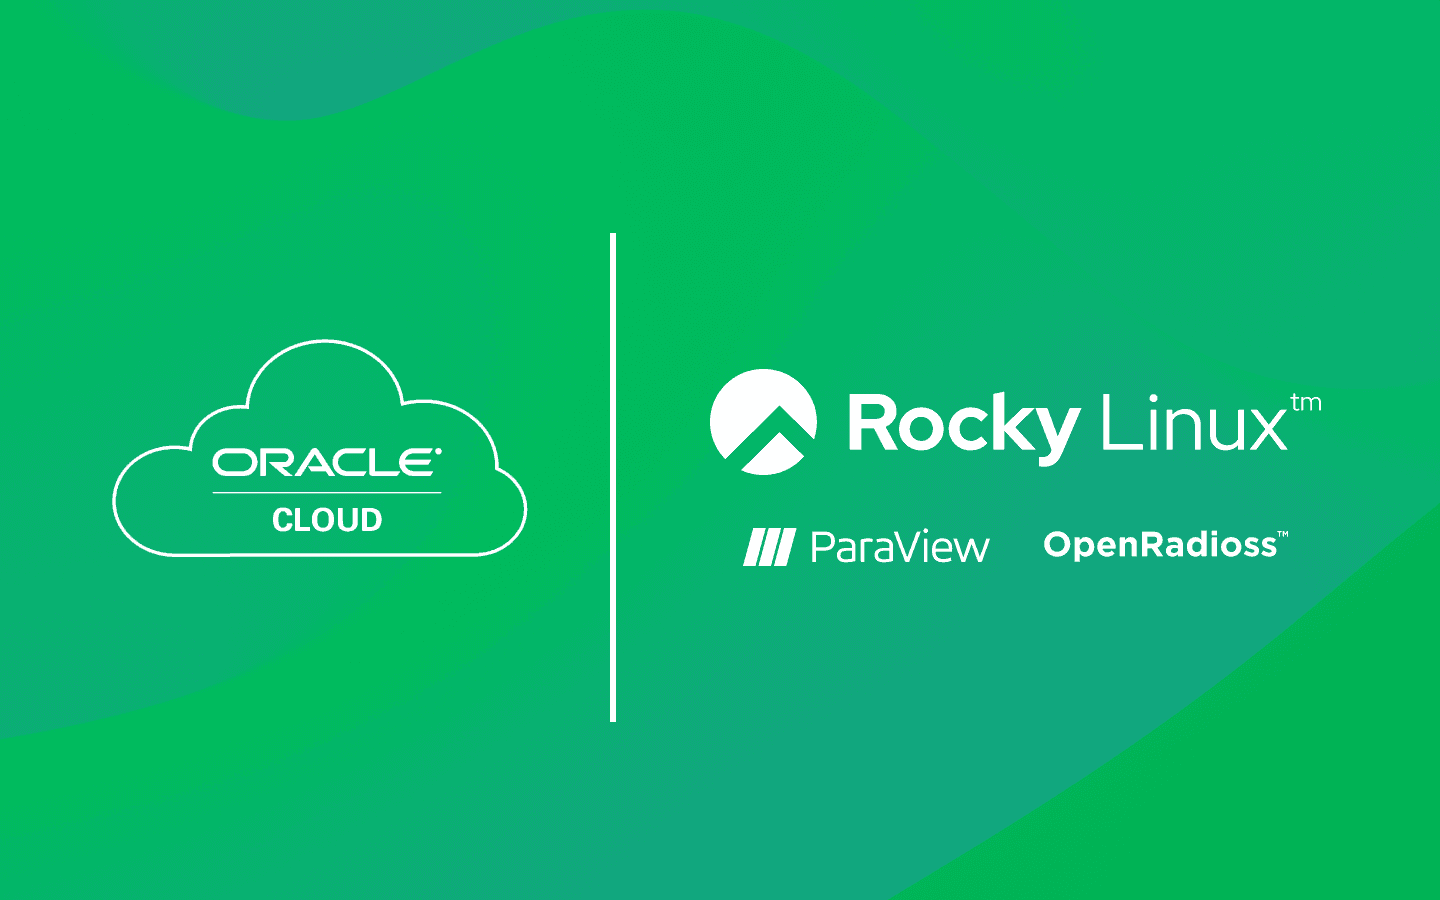 OpenRadioss and ParaView on Rocky Linux 9.1, Now on Oracle Cloud